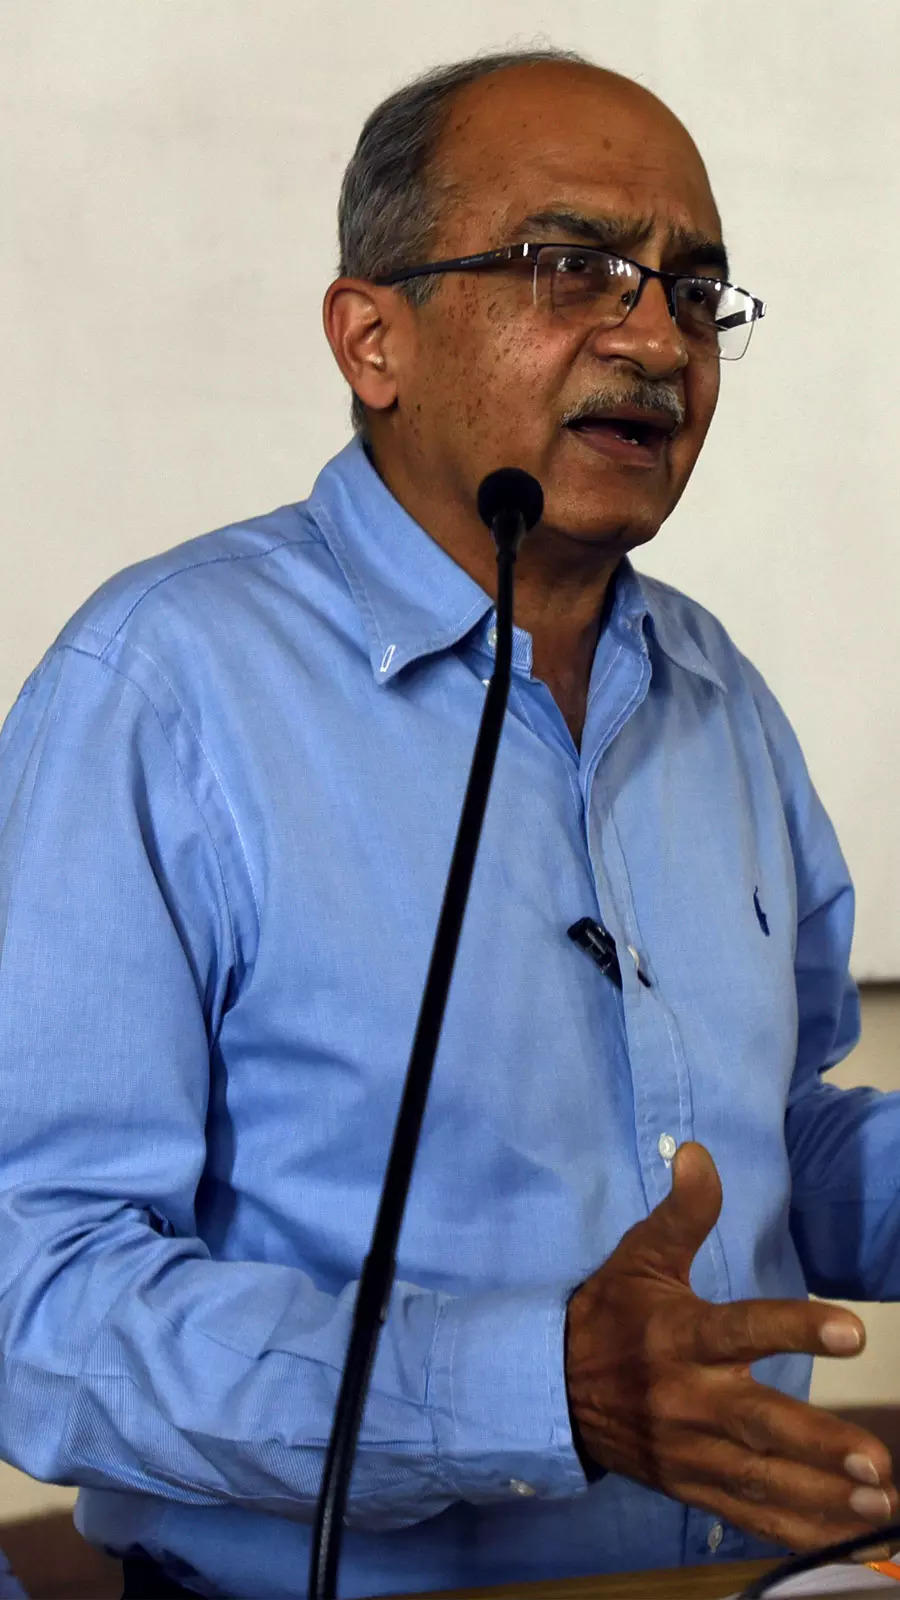 <p>With his expertise in constitutional law, Prashant Bhushan has argued numerous cases related to civil liberties, human rights, and environmental protection before the Supreme Court of India.</p>